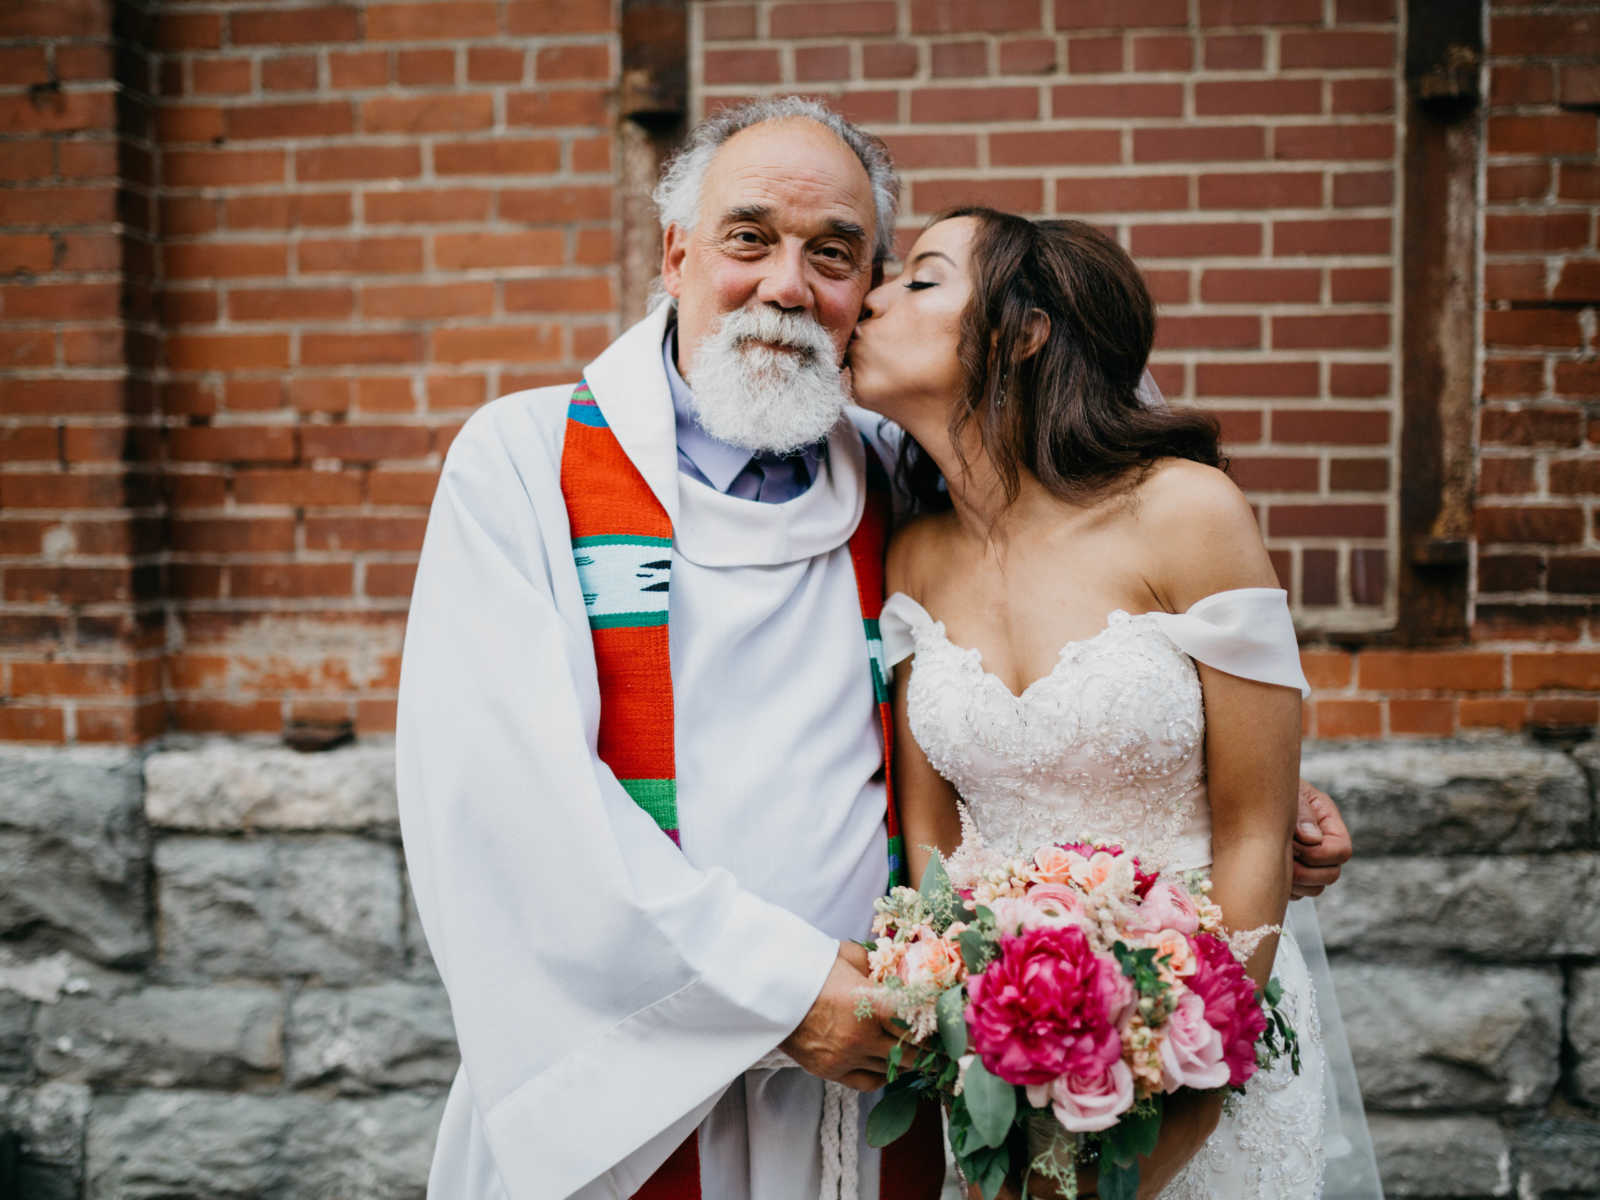 Woman kisses stepdad on the cheek at her wedding where he was officiant